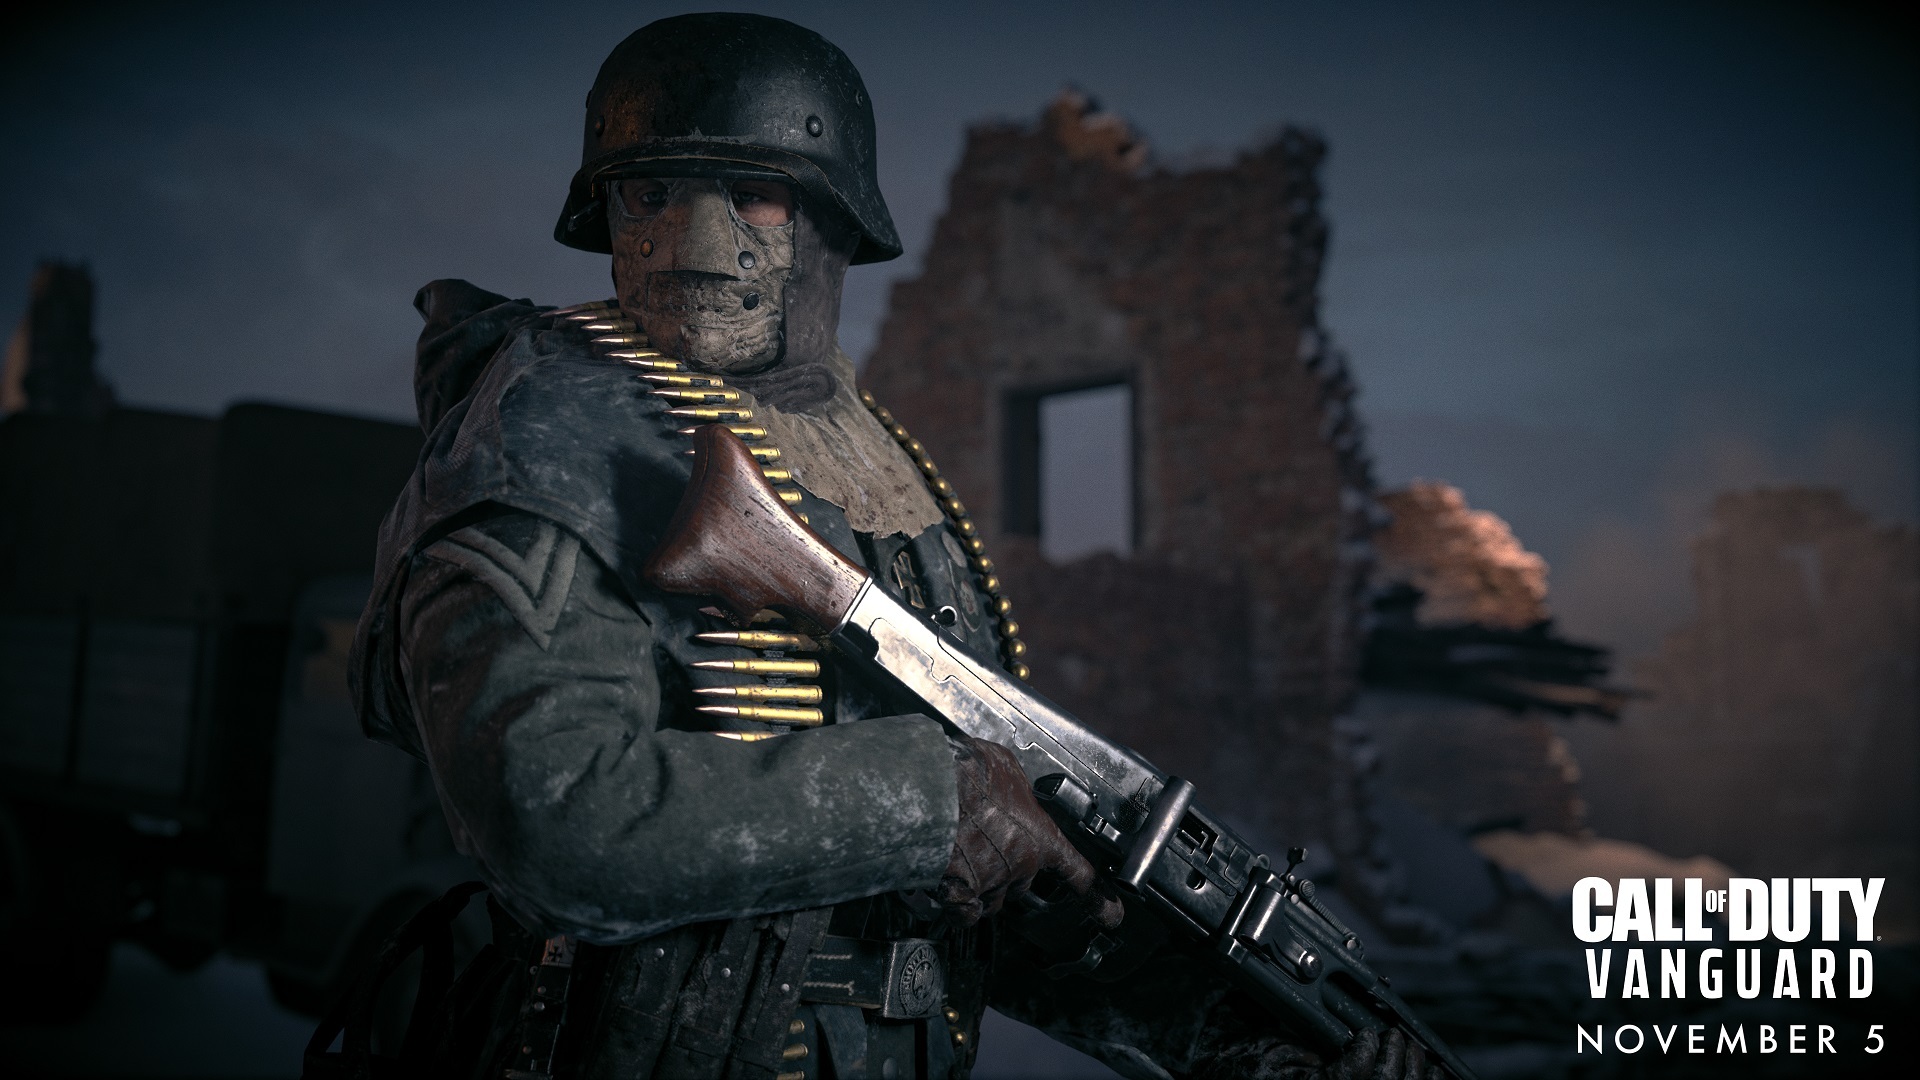 Call Of Duty: Vanguard Returns To WW2 By Way Of Modern Warfare, Releases In November